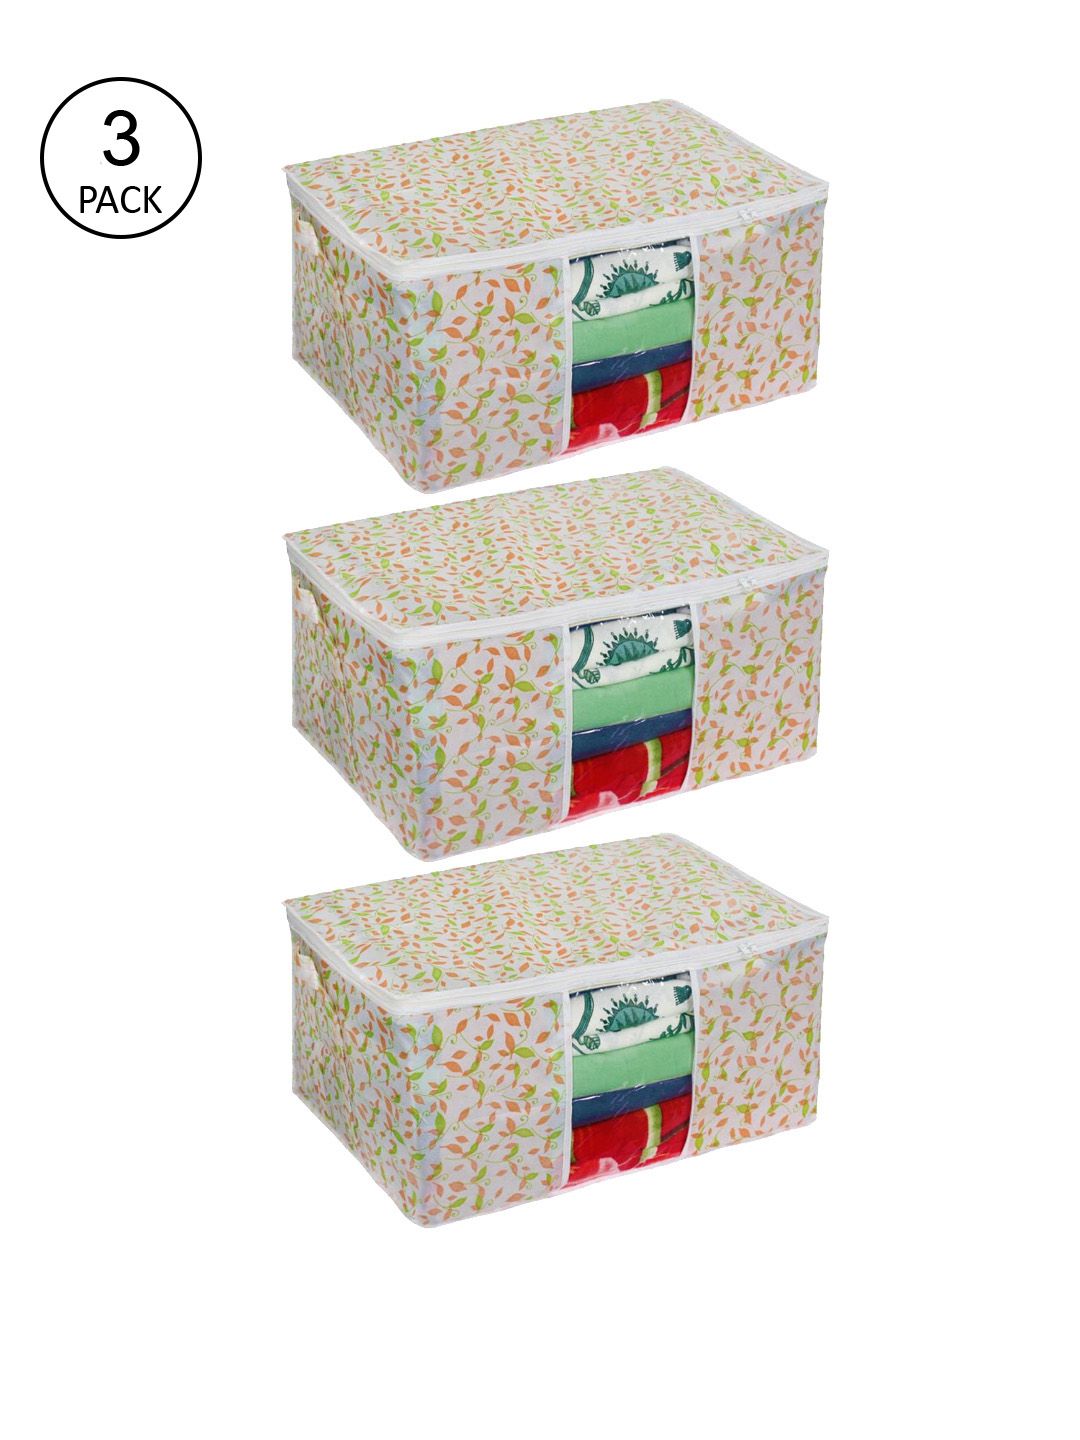 prettykrafts Set Of 3 White & Green Printed Underbed Large Storage Organisers Price in India